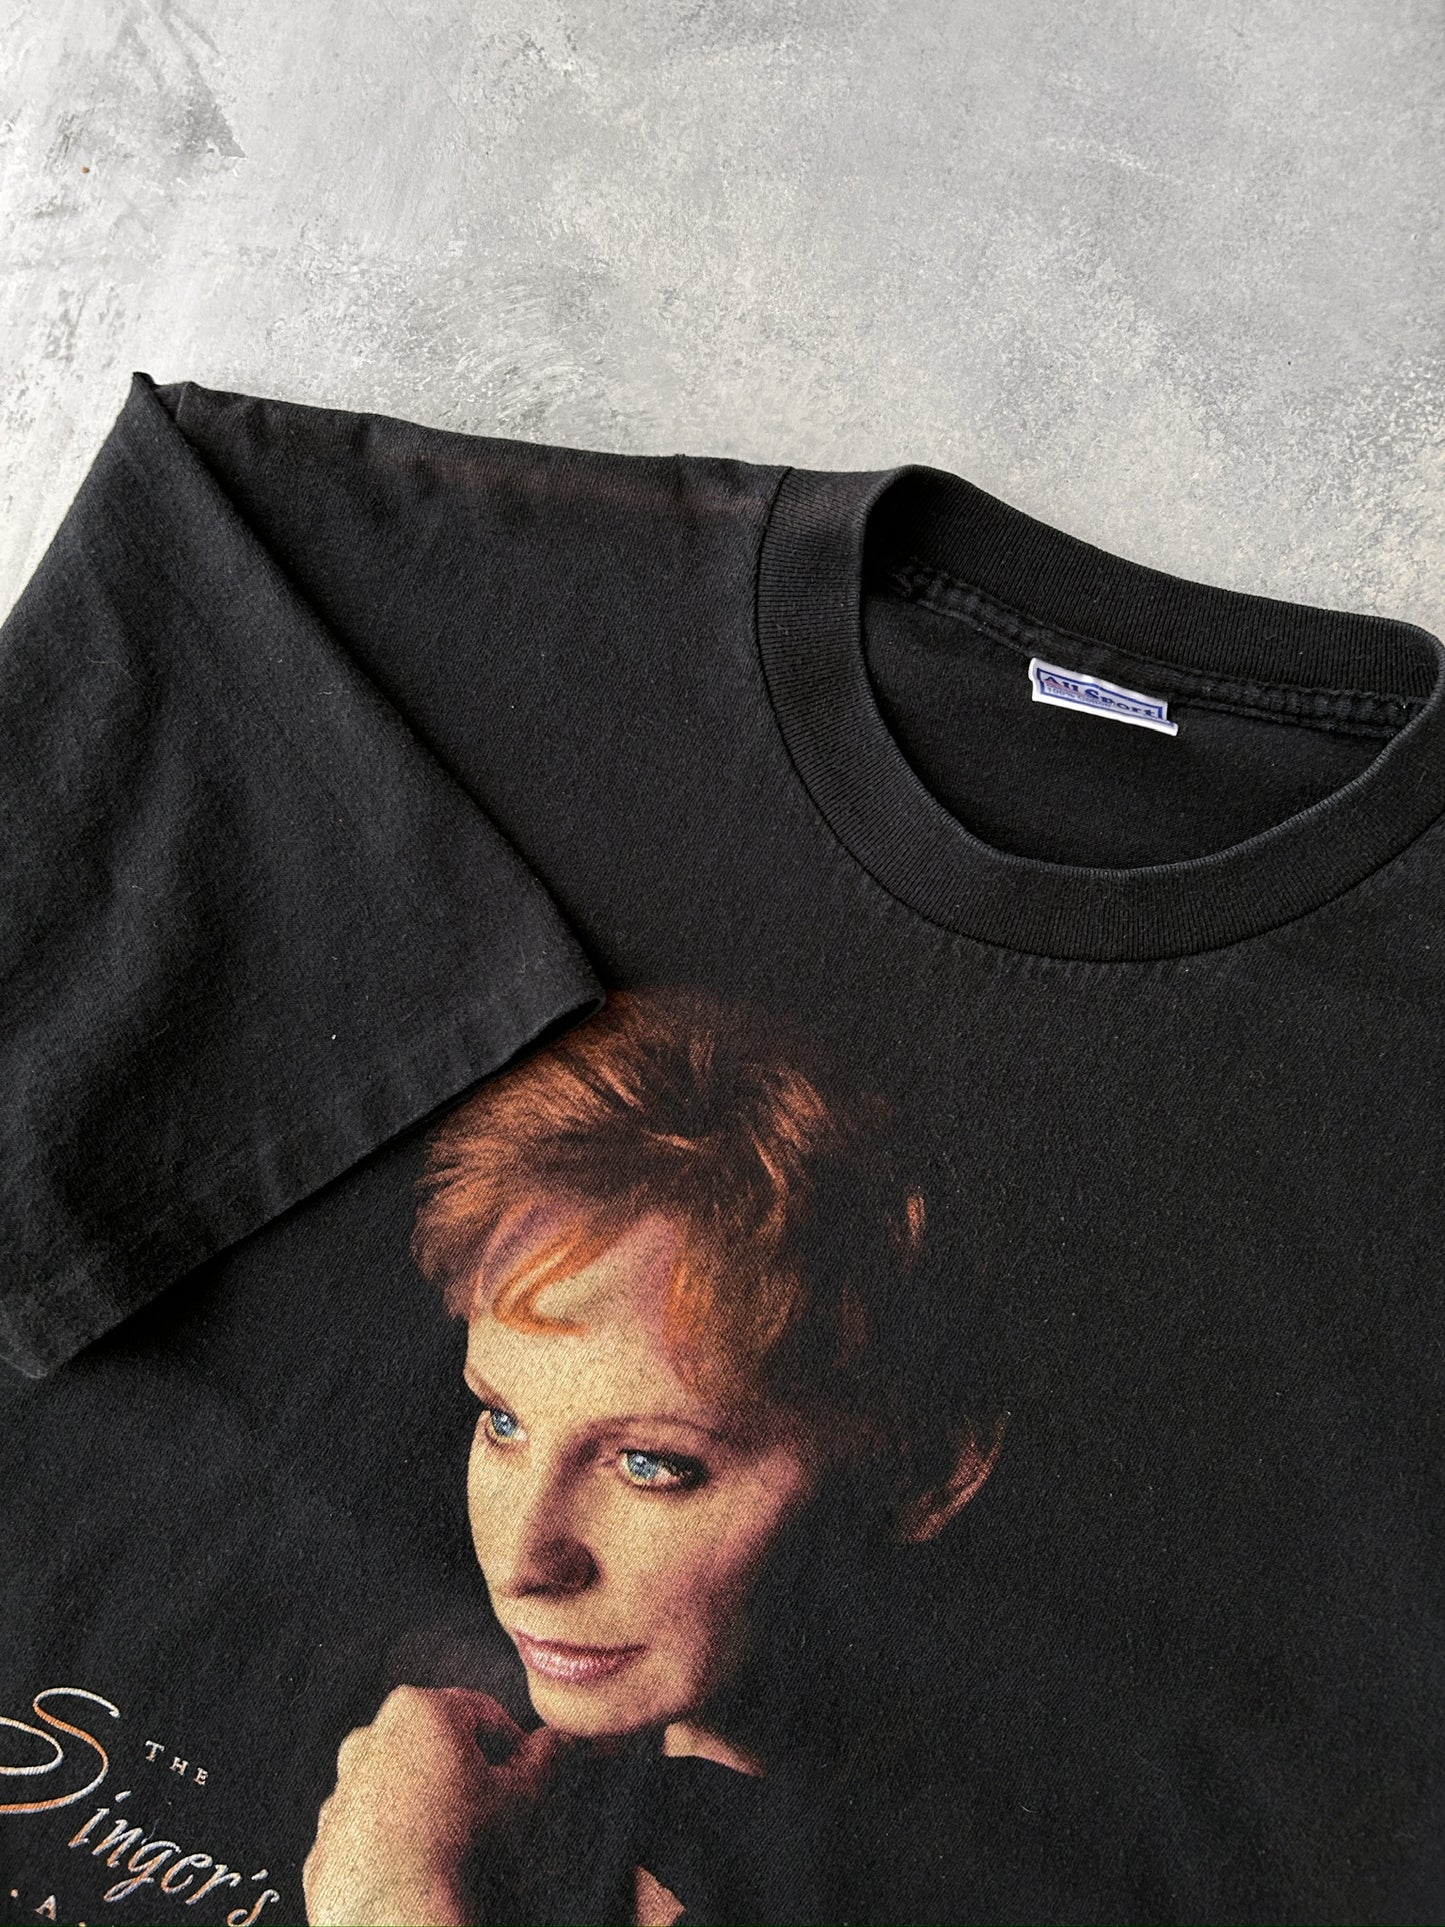 The Singer's Diary Reba McEntire T-Shirt '99 - Large